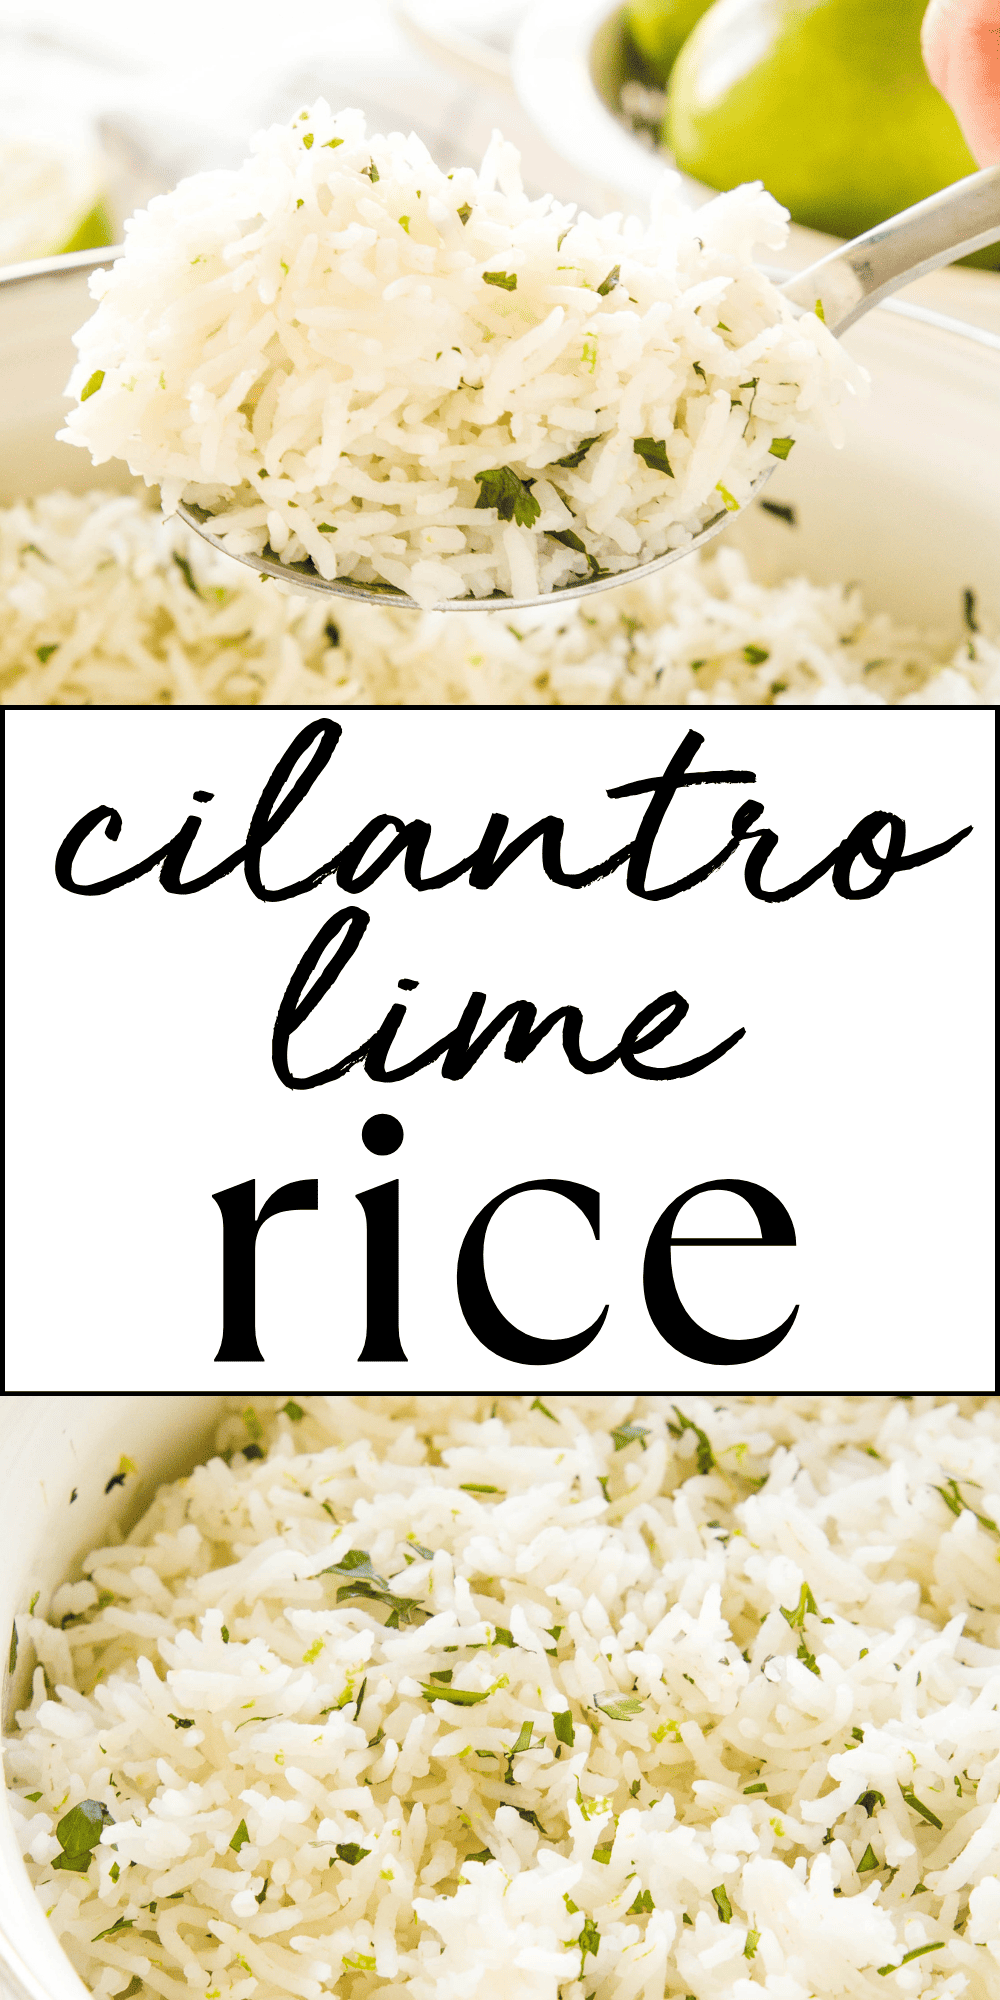 This Cilantro Lime Rice recipe is the perfect easy side dish that's ready in 20 minutes or less. Perfect for serving with your favourite Tex-Mex dishes, in burritos or fajitas, or alongside grilled chicken or fish. Made with long grain rice, fresh lime and cilantro, this Cilantro Lime Rice is full of flavour! Recipe from thebusybaker.ca! #cilantrolimerice #cilantrorice #limerice #sidedish #ricecooker #mexicanrice #rice #glutenfree via @busybakerblog